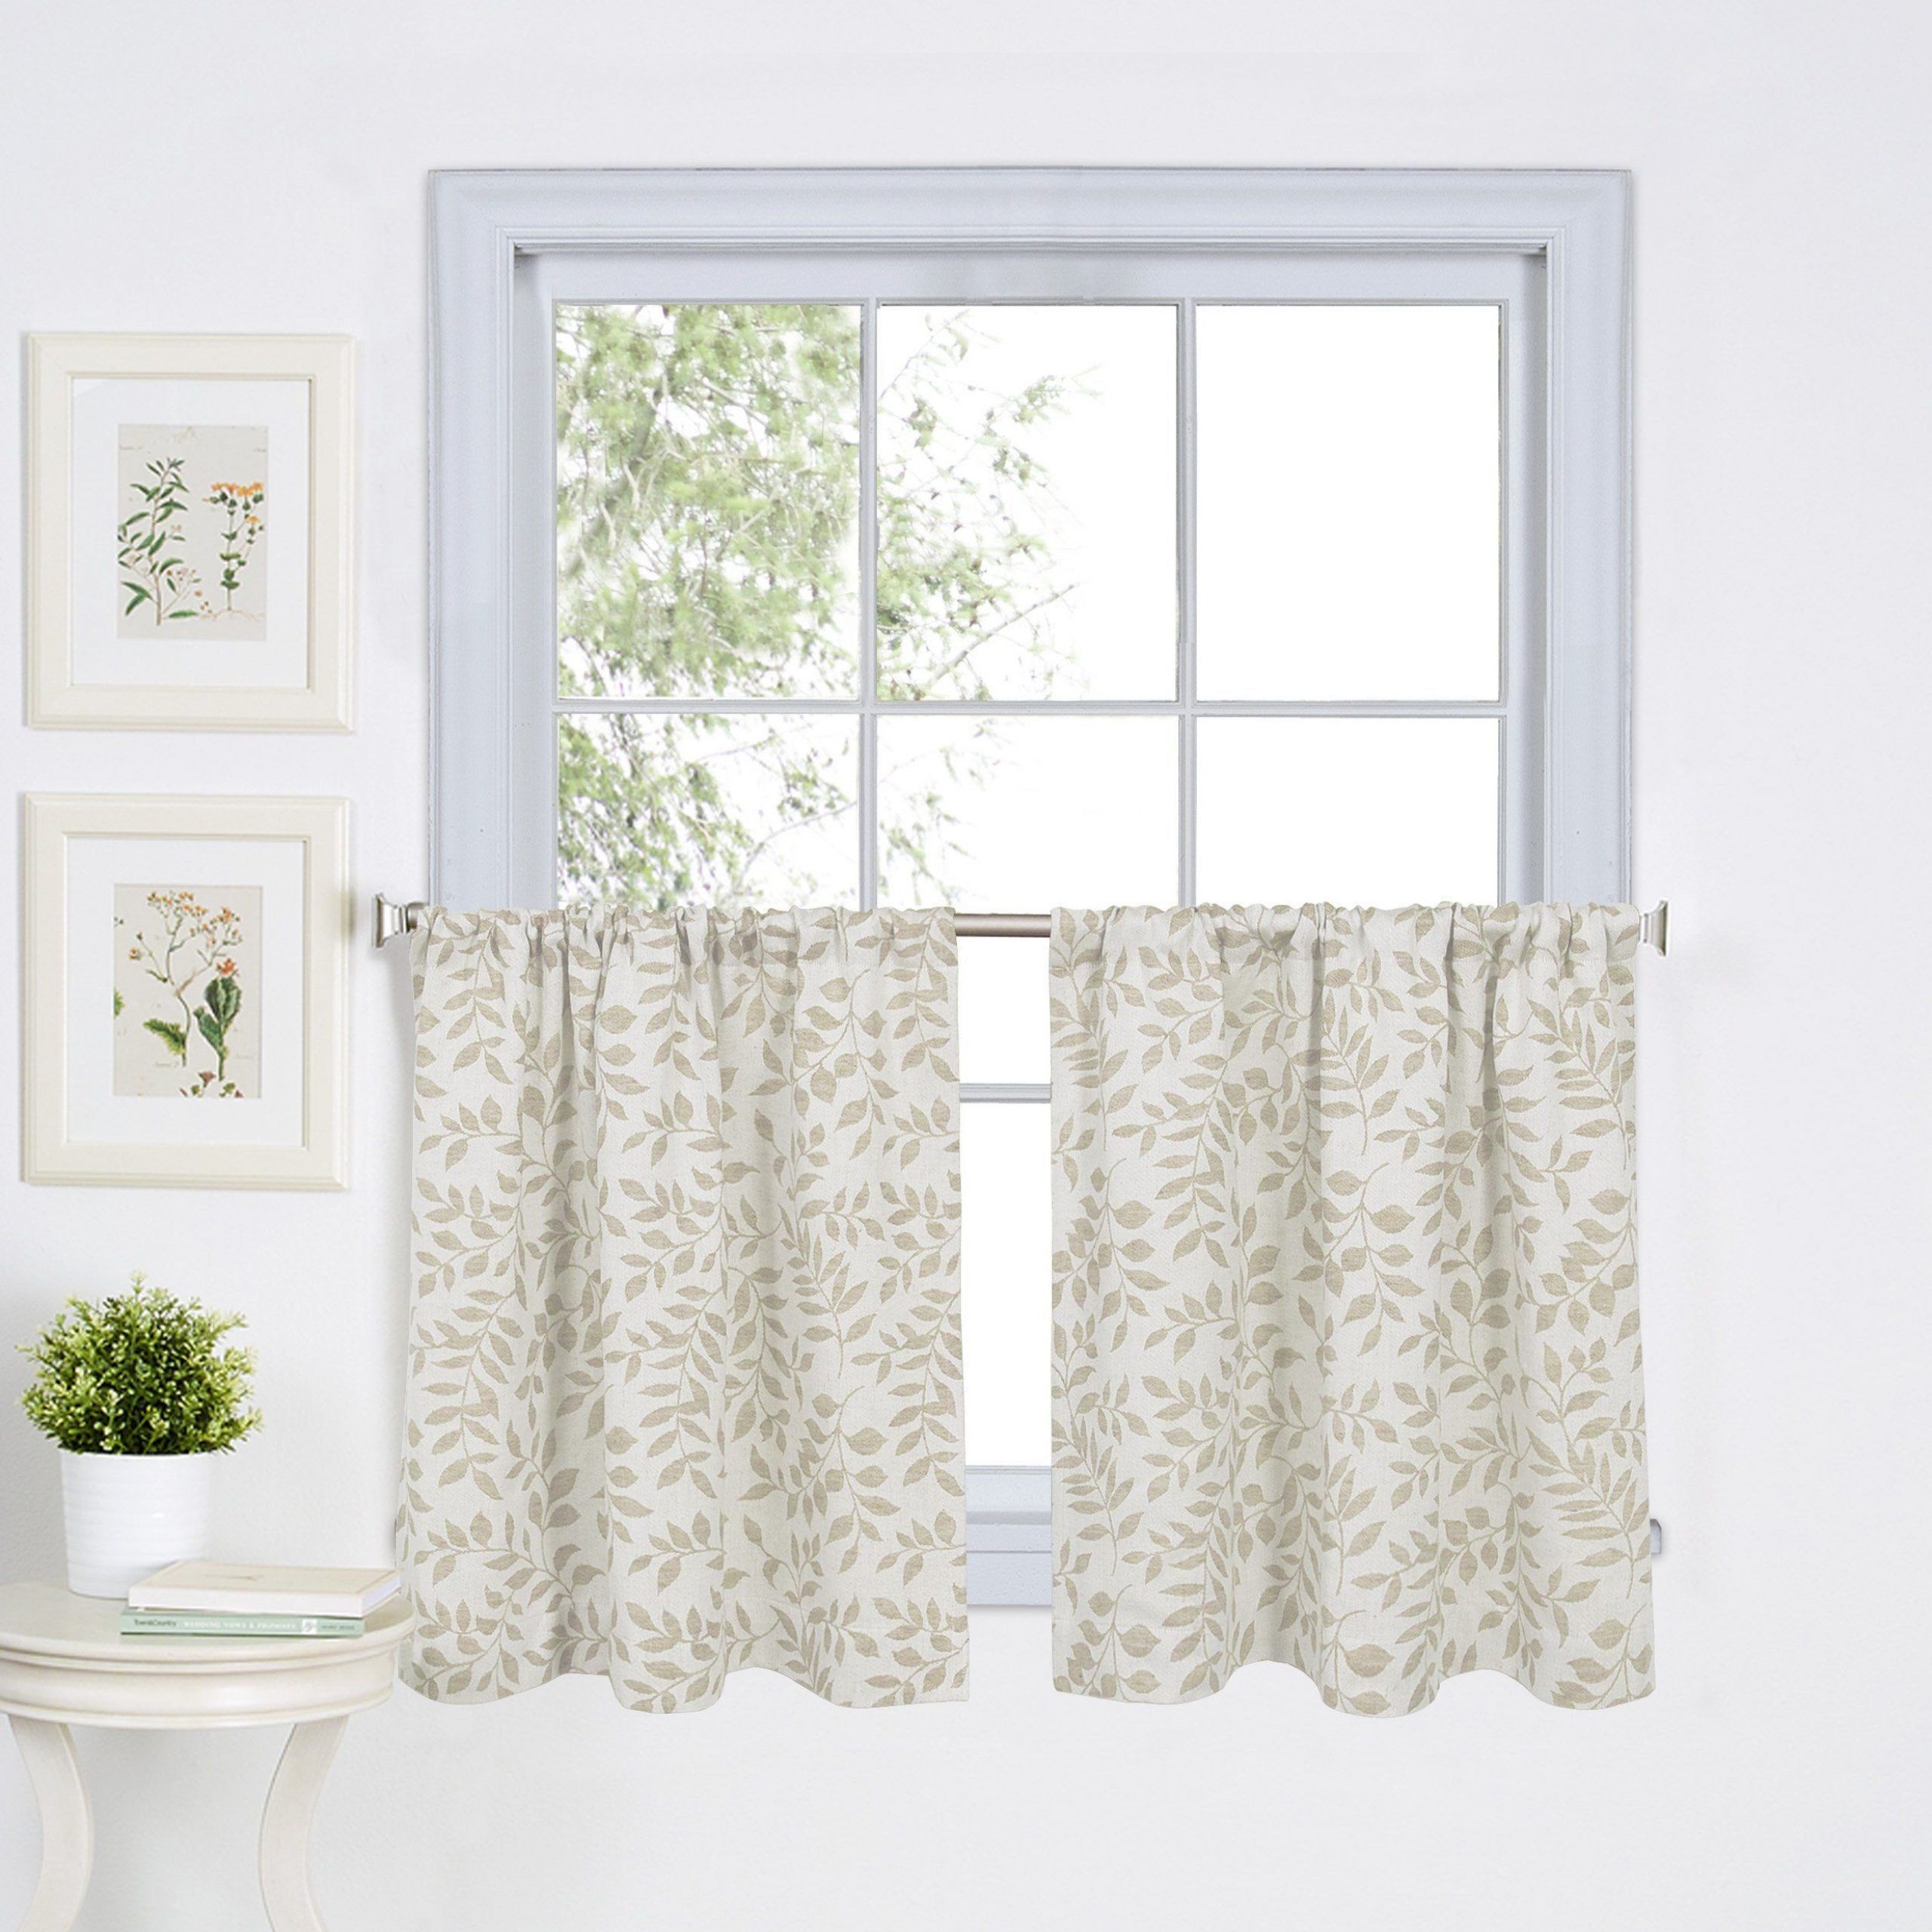 Serene Rod Pocket Window Tiers In 2019 | Products | Curtain With Navy Vertical Ruffled Waterfall Valance And Curtain Tiers (View 9 of 20)